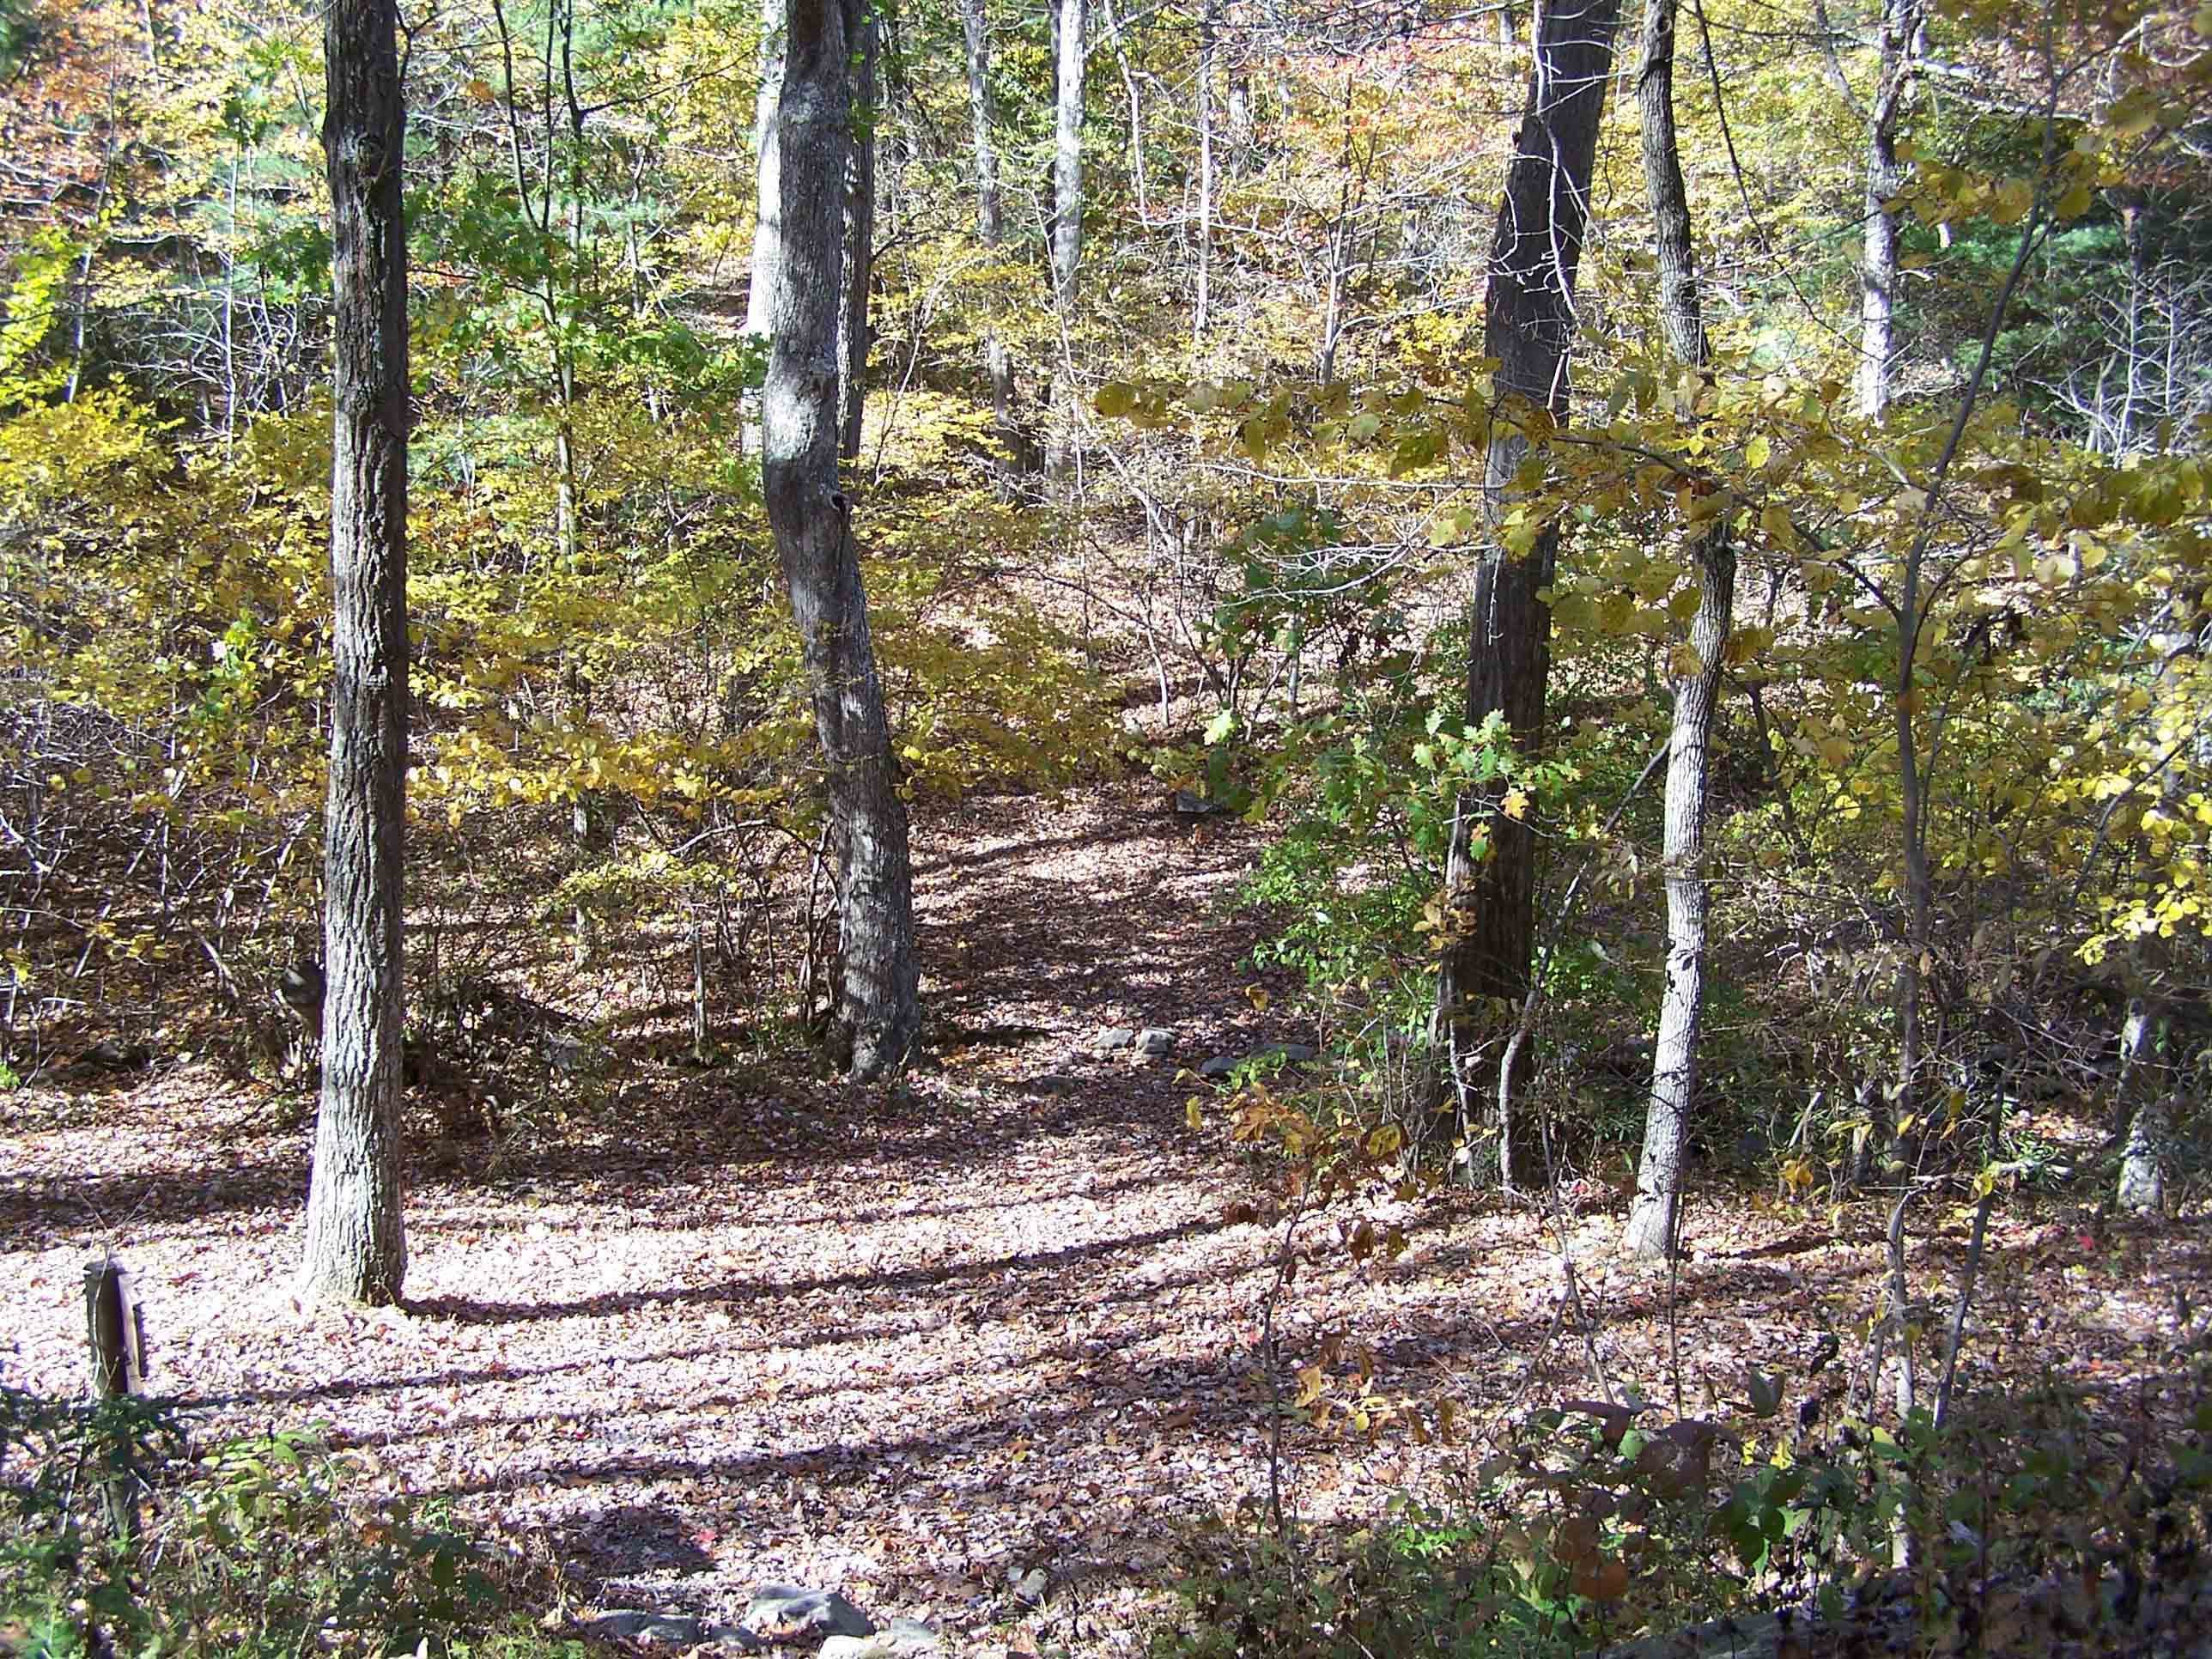 Trail at Milesburn Cabin mm 12.1. Courtesy at@rohland.org